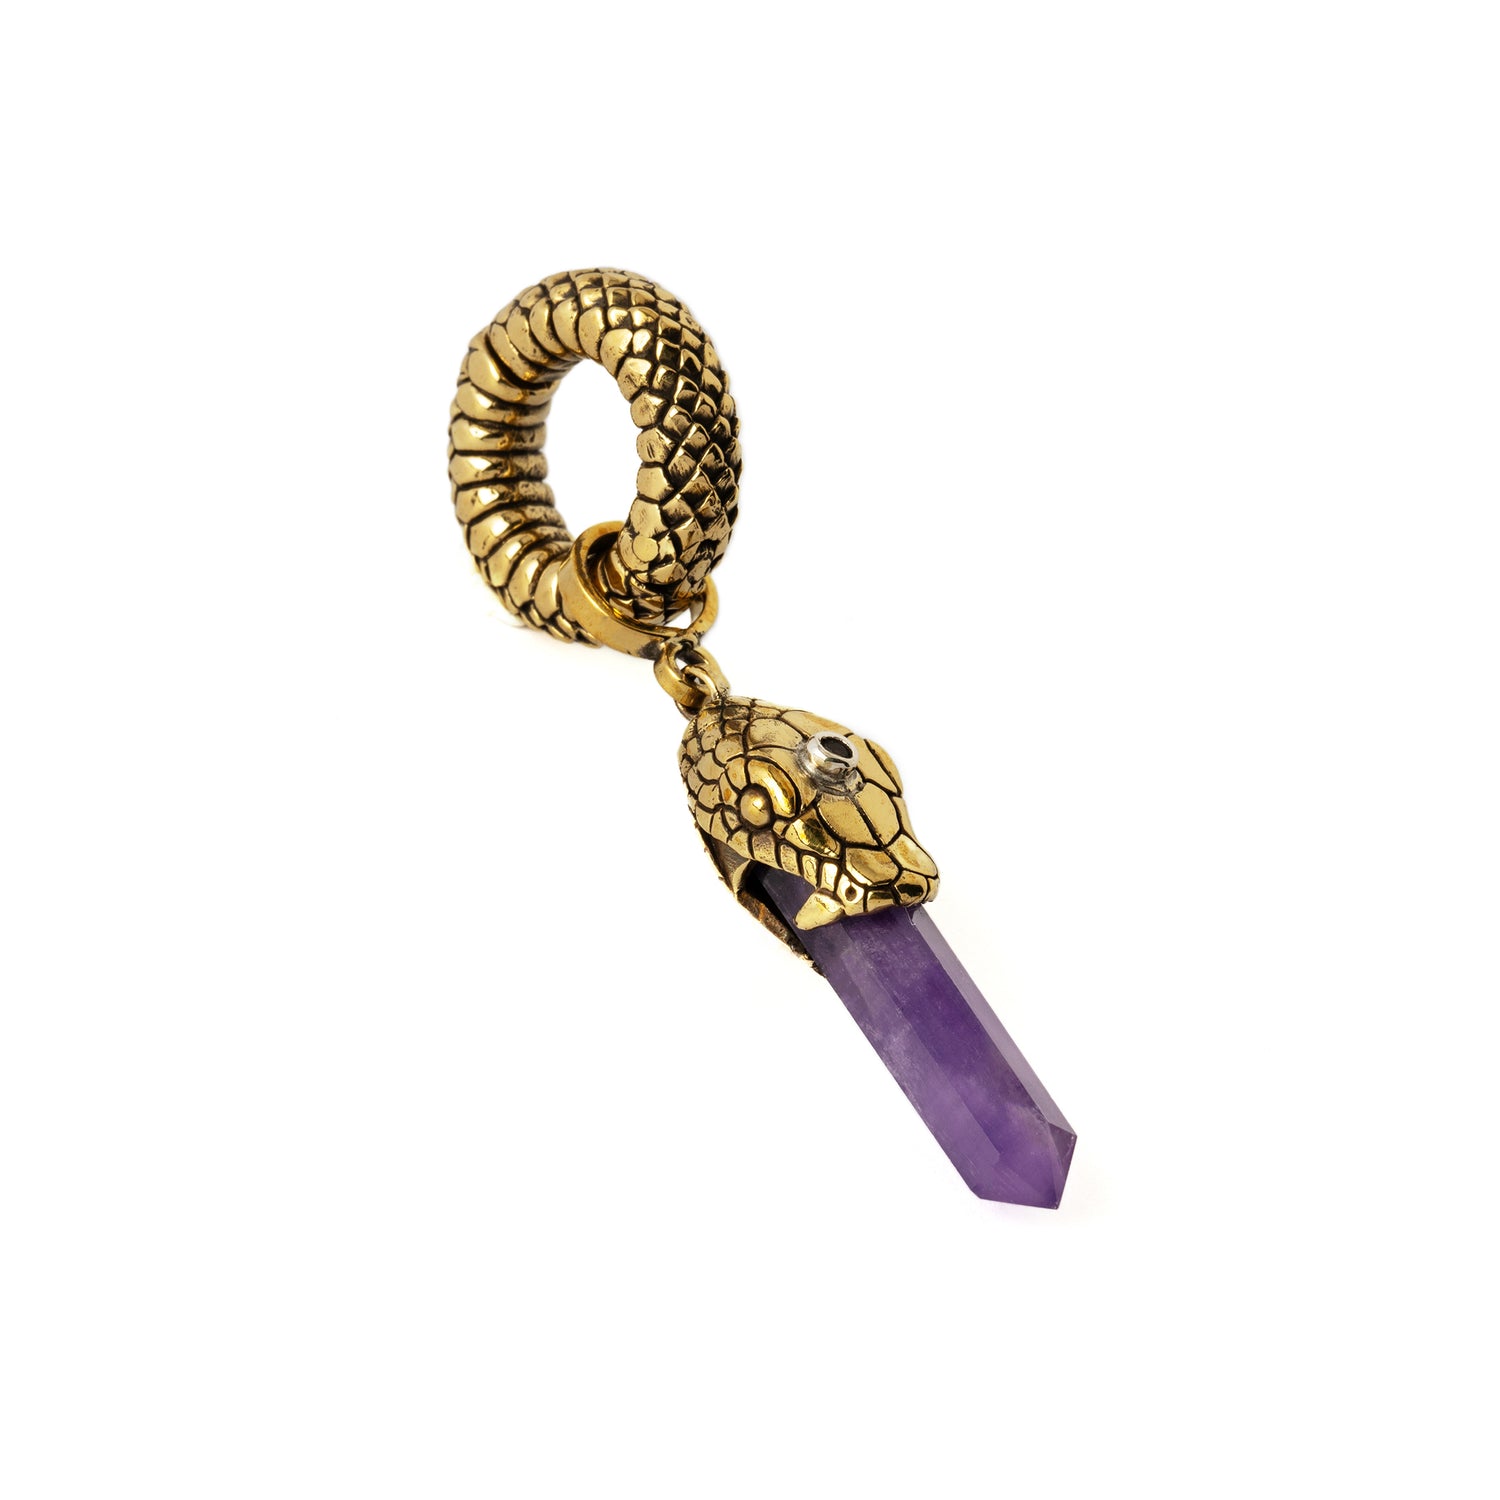 Rebirth Snake Hanger with Amethyst right side view